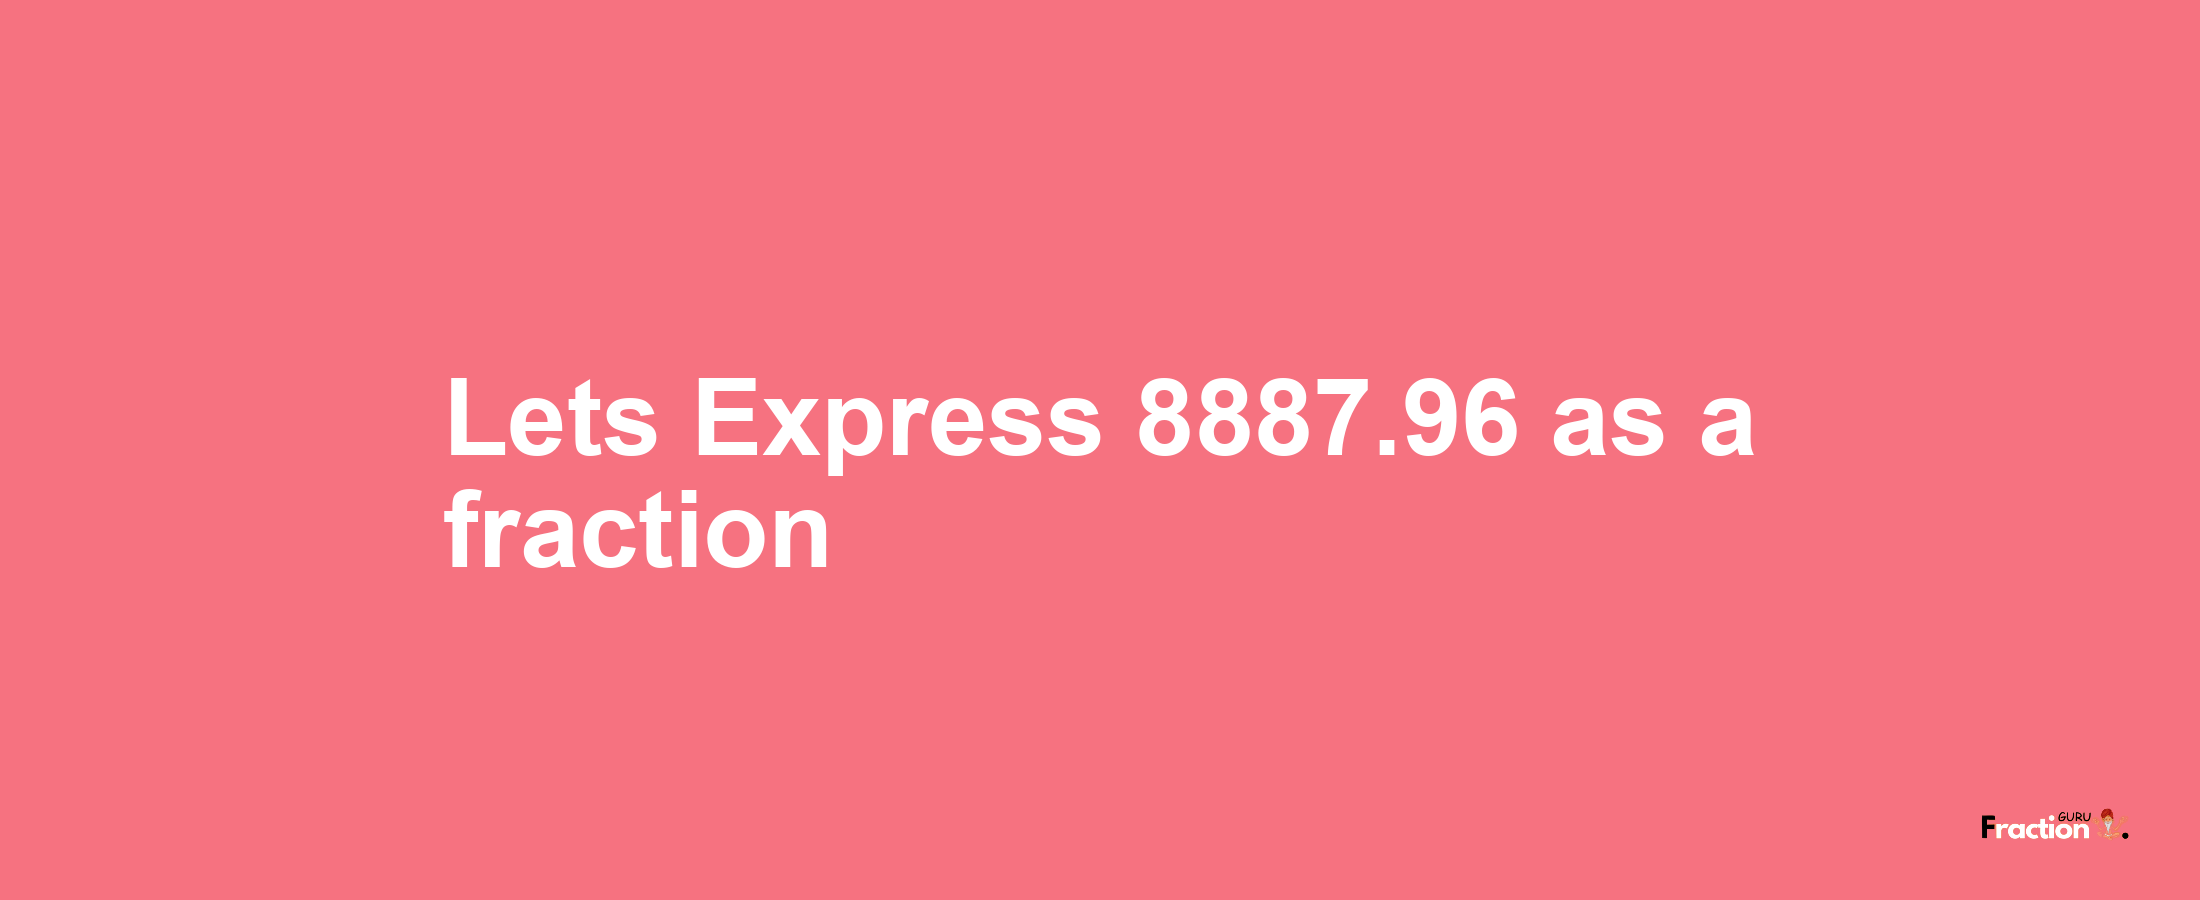 Lets Express 8887.96 as afraction